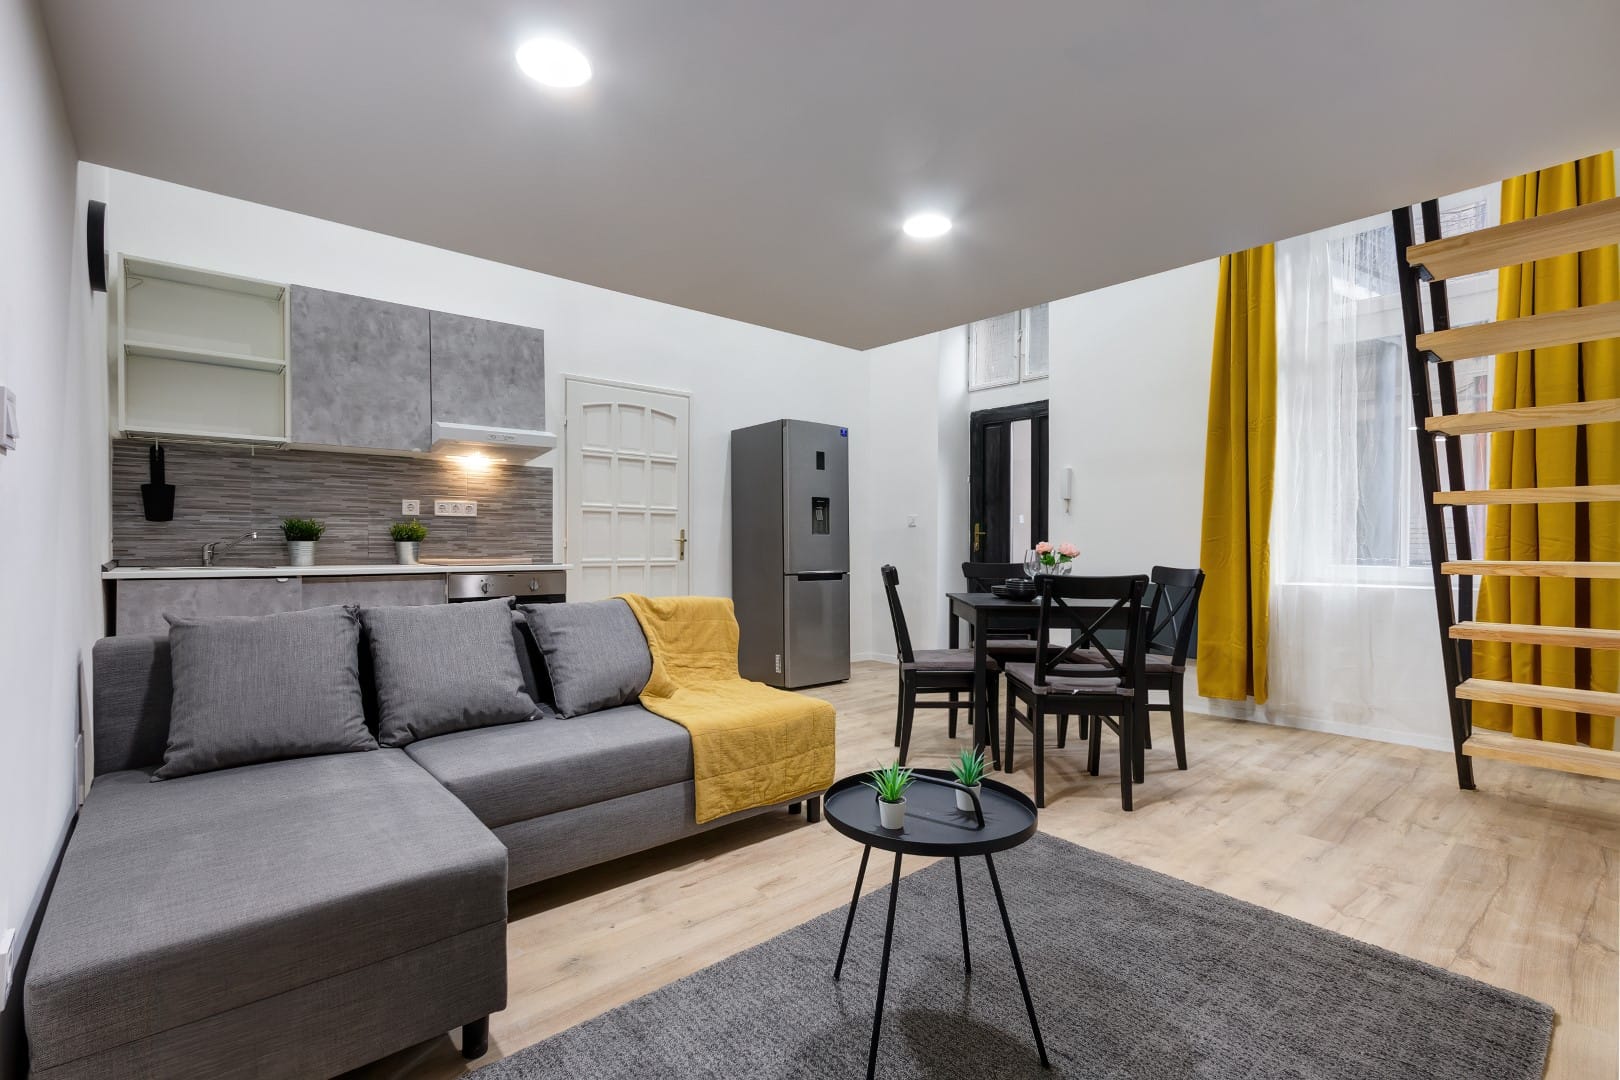 budapest-apartments-for-sale-renovated-flat-for-sale-downtown-real-estate-budapest-brand-new-studio-apartment-for-sal21